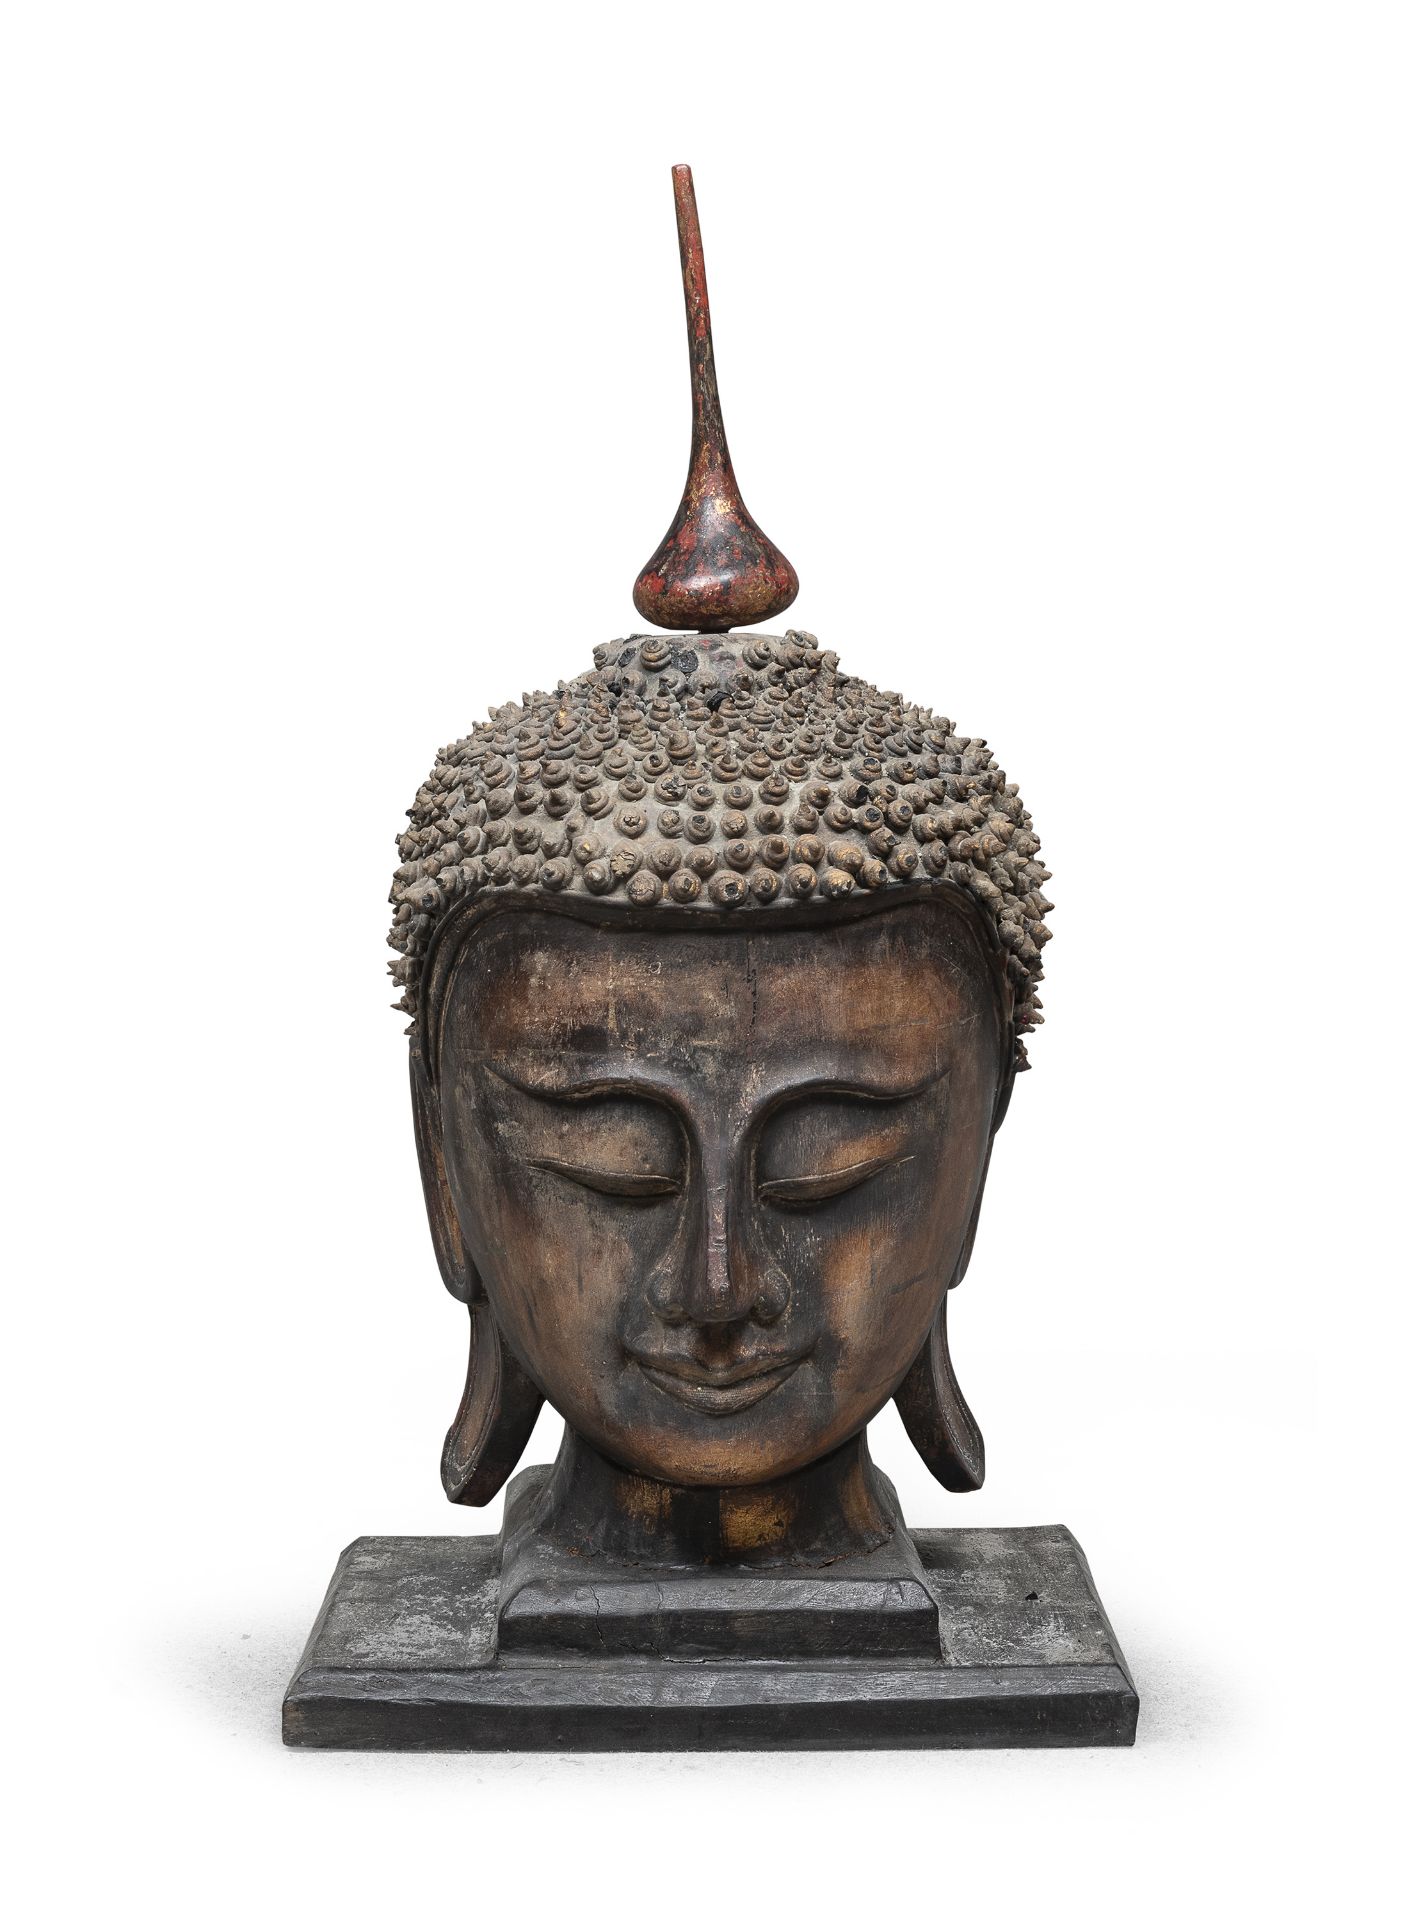 A BURMA GILTWOOD SCULPTURE OF BUDDHA'S HEAD. EARLY 20TH CENTURY. DEFECTS.